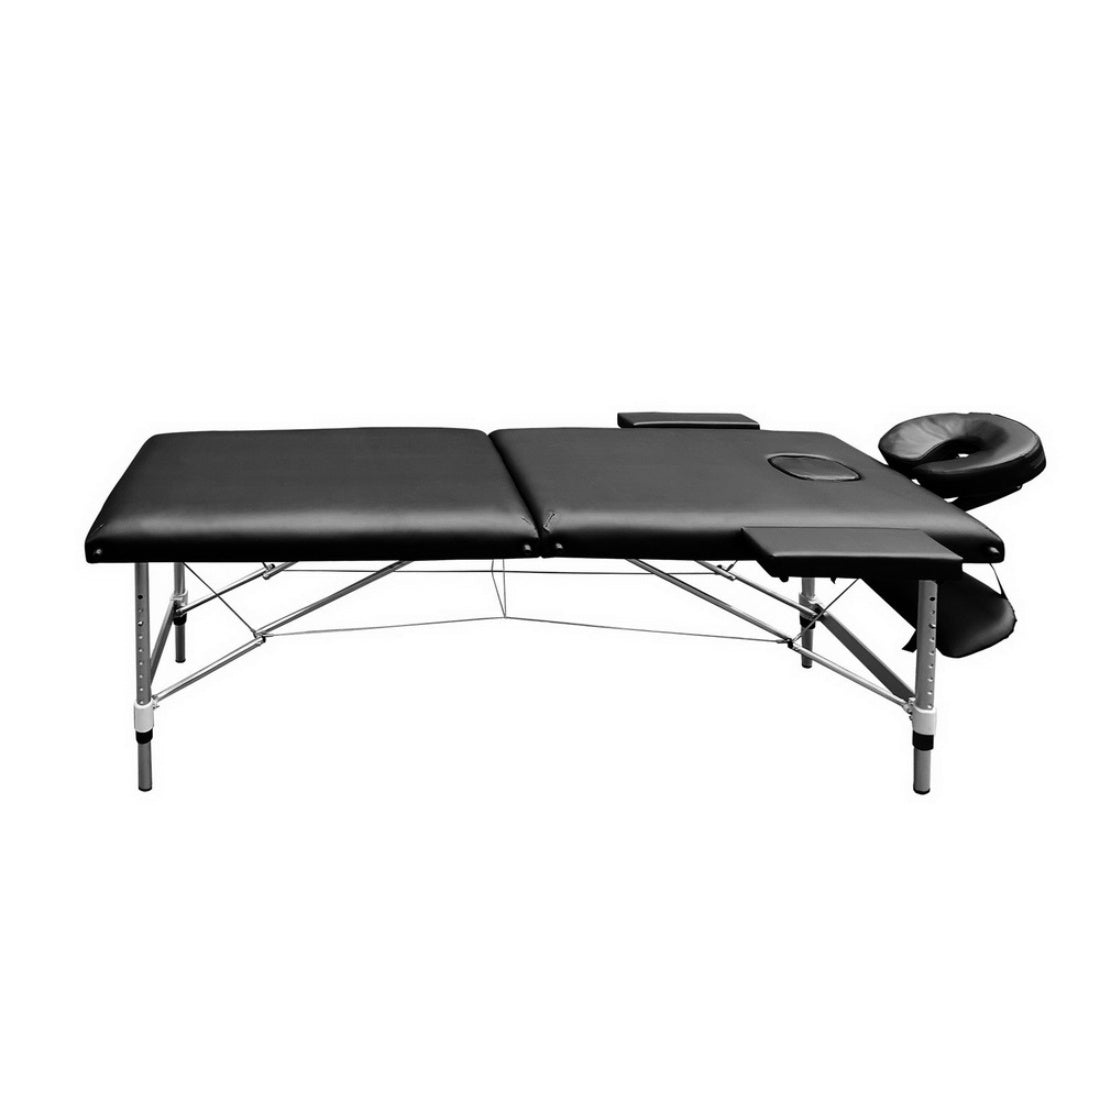 2019 Model RelaxPro Portable Massage Table Aluminium Beauty Therapy Bed